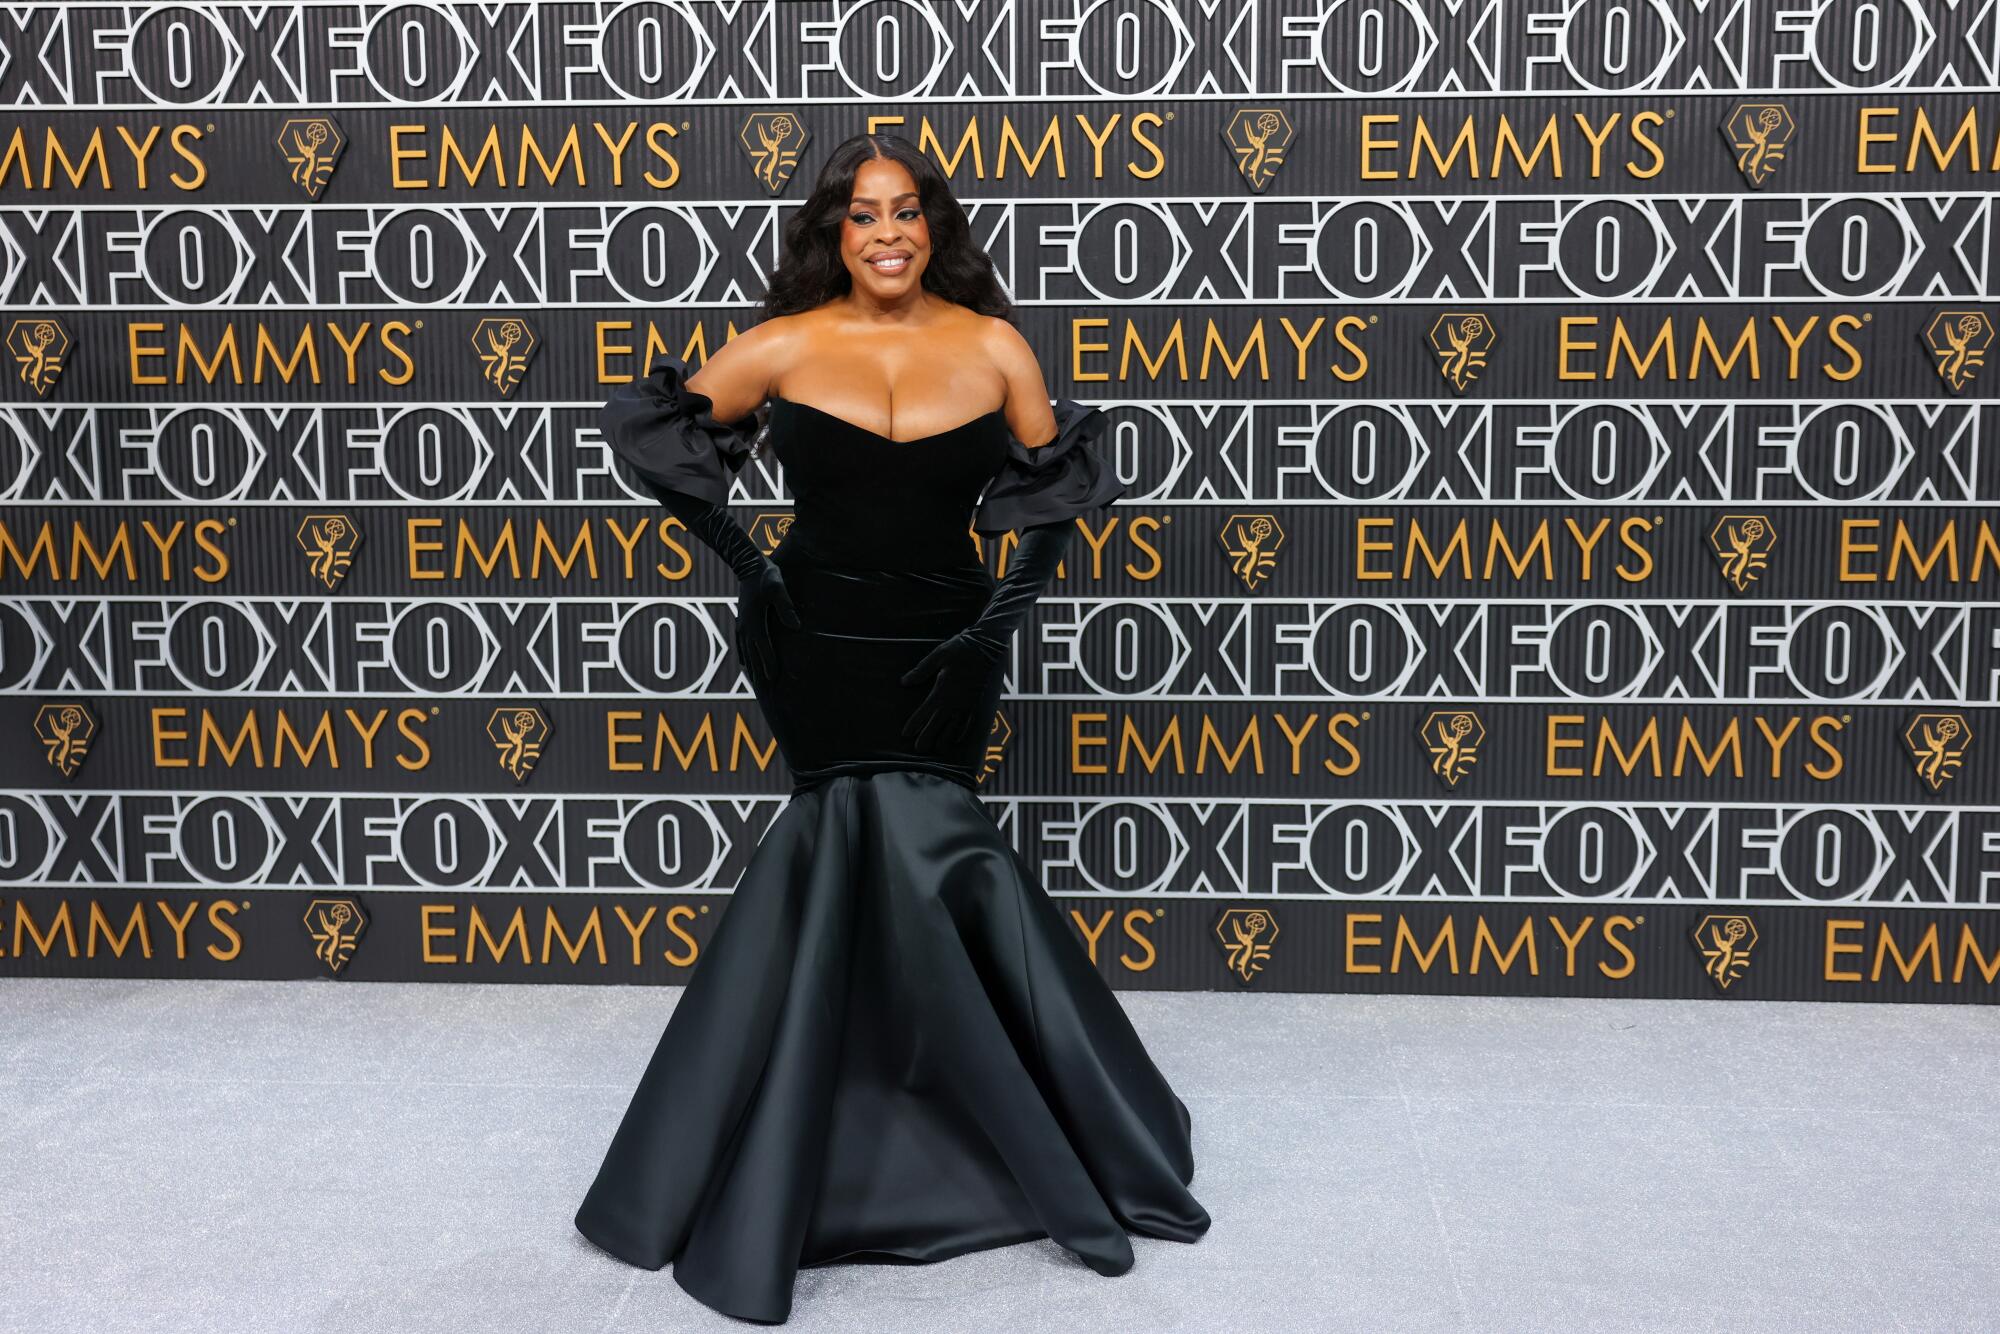 Niecy Nash-Betts wears a black dress on the Emmys red carpet.